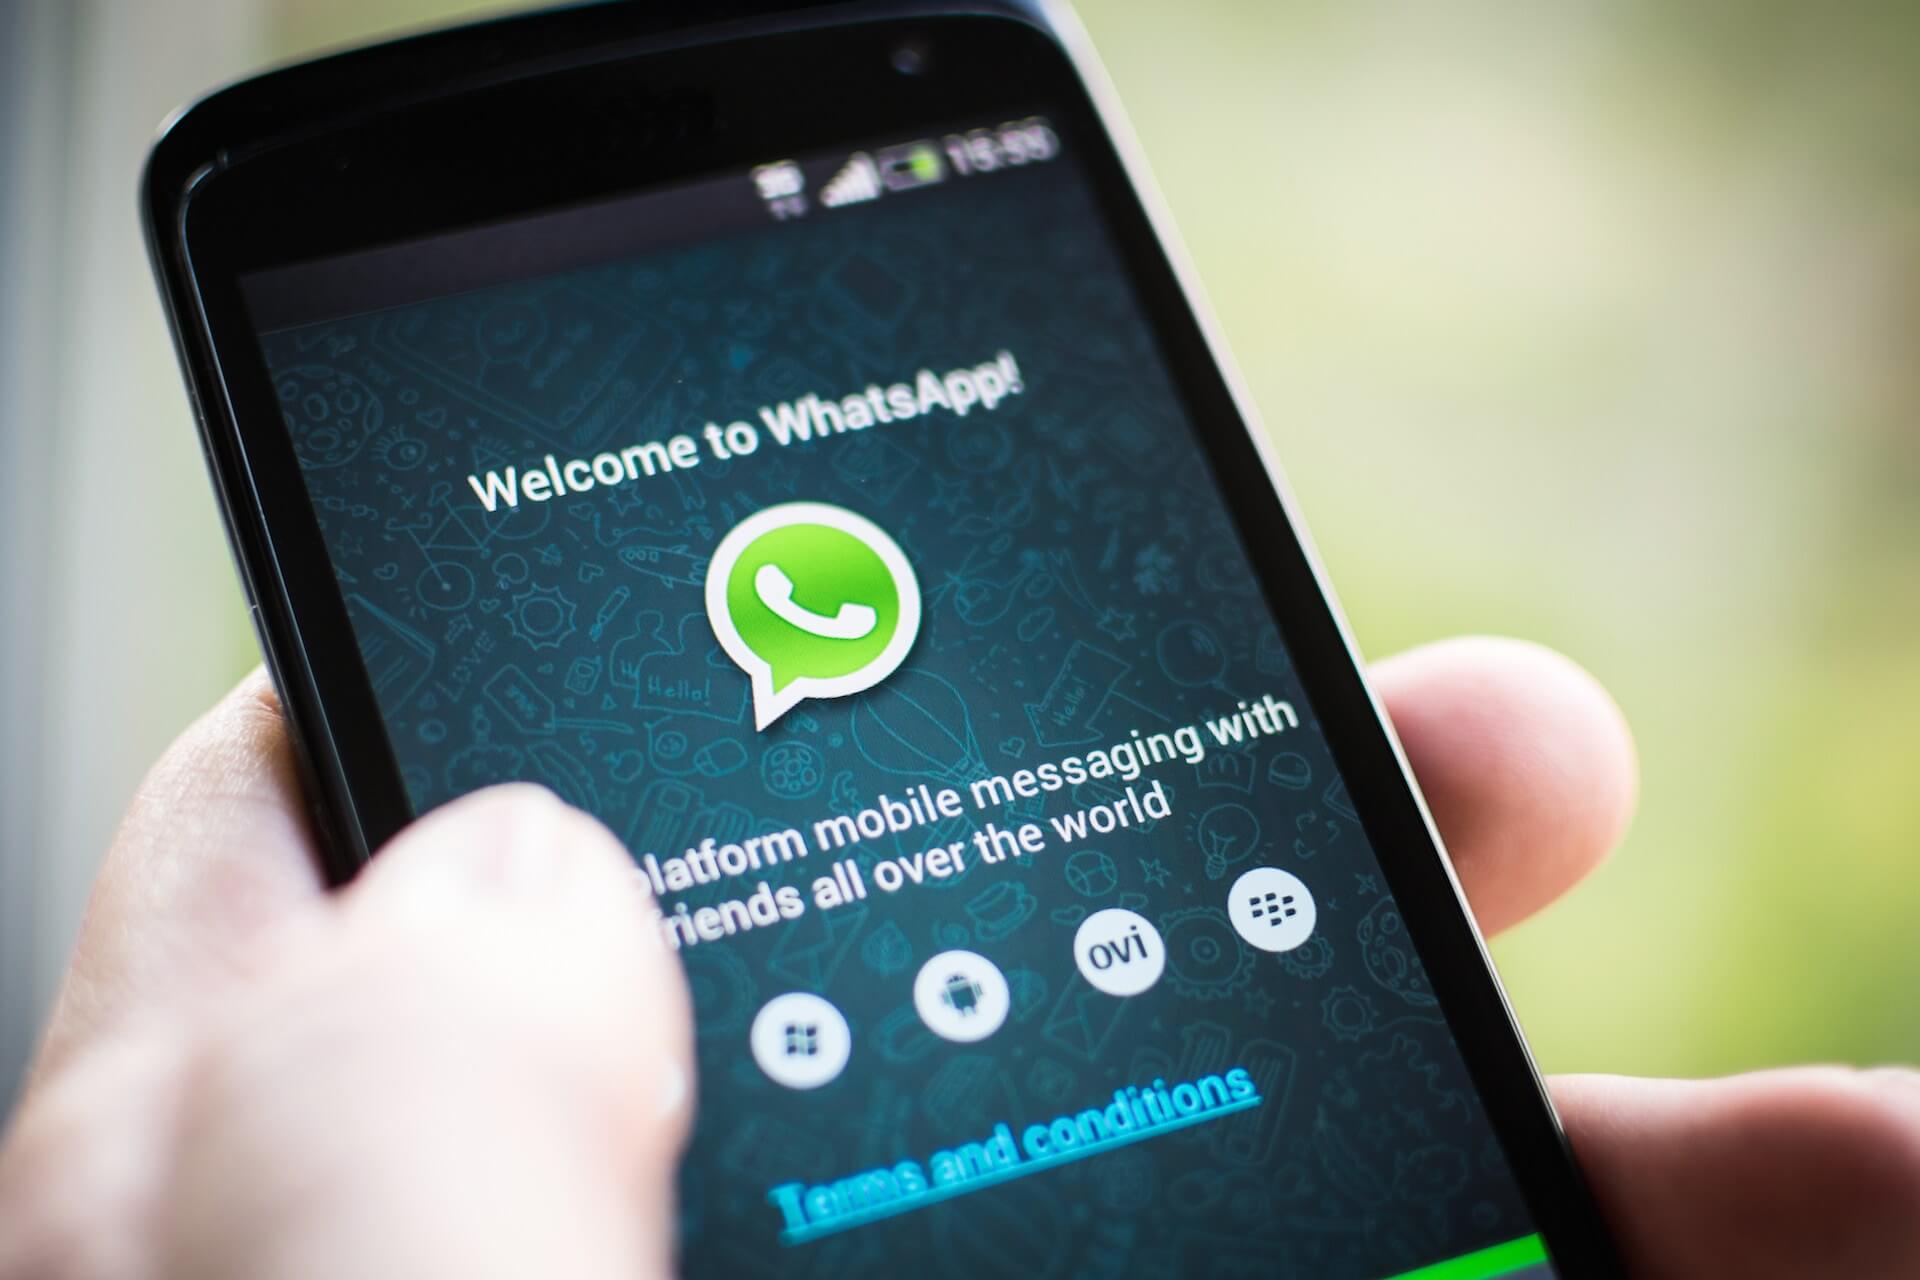 Your Personal Data may be leaked by WhatsApp thorough IP address